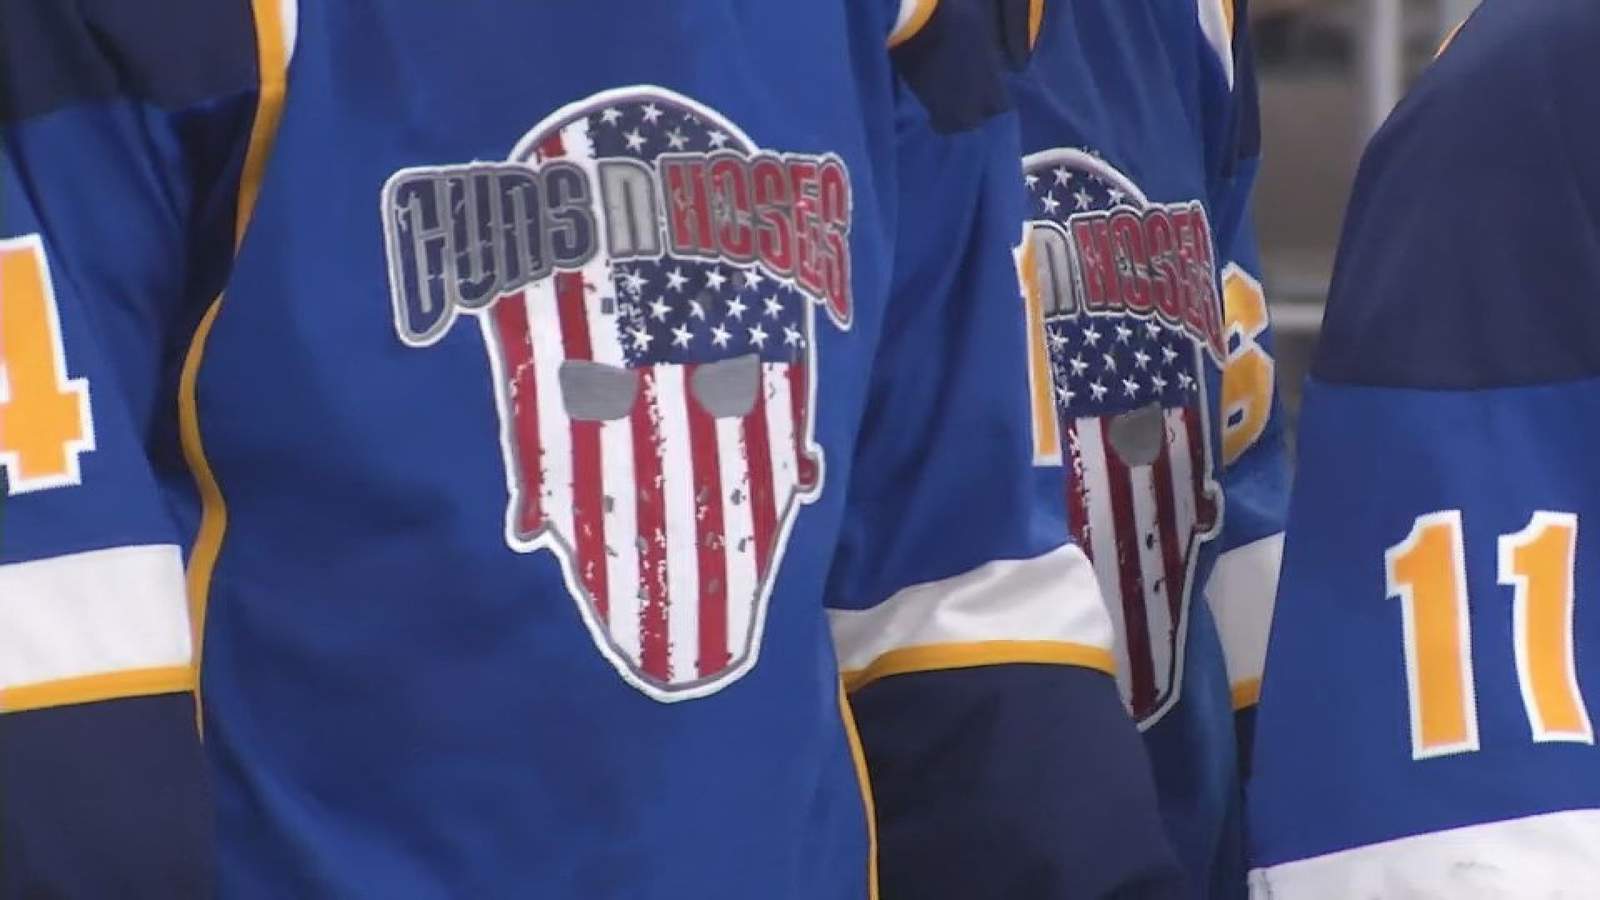 Bragging rights on the line again for Guns N’ Hoses hockey match on Feb. 20